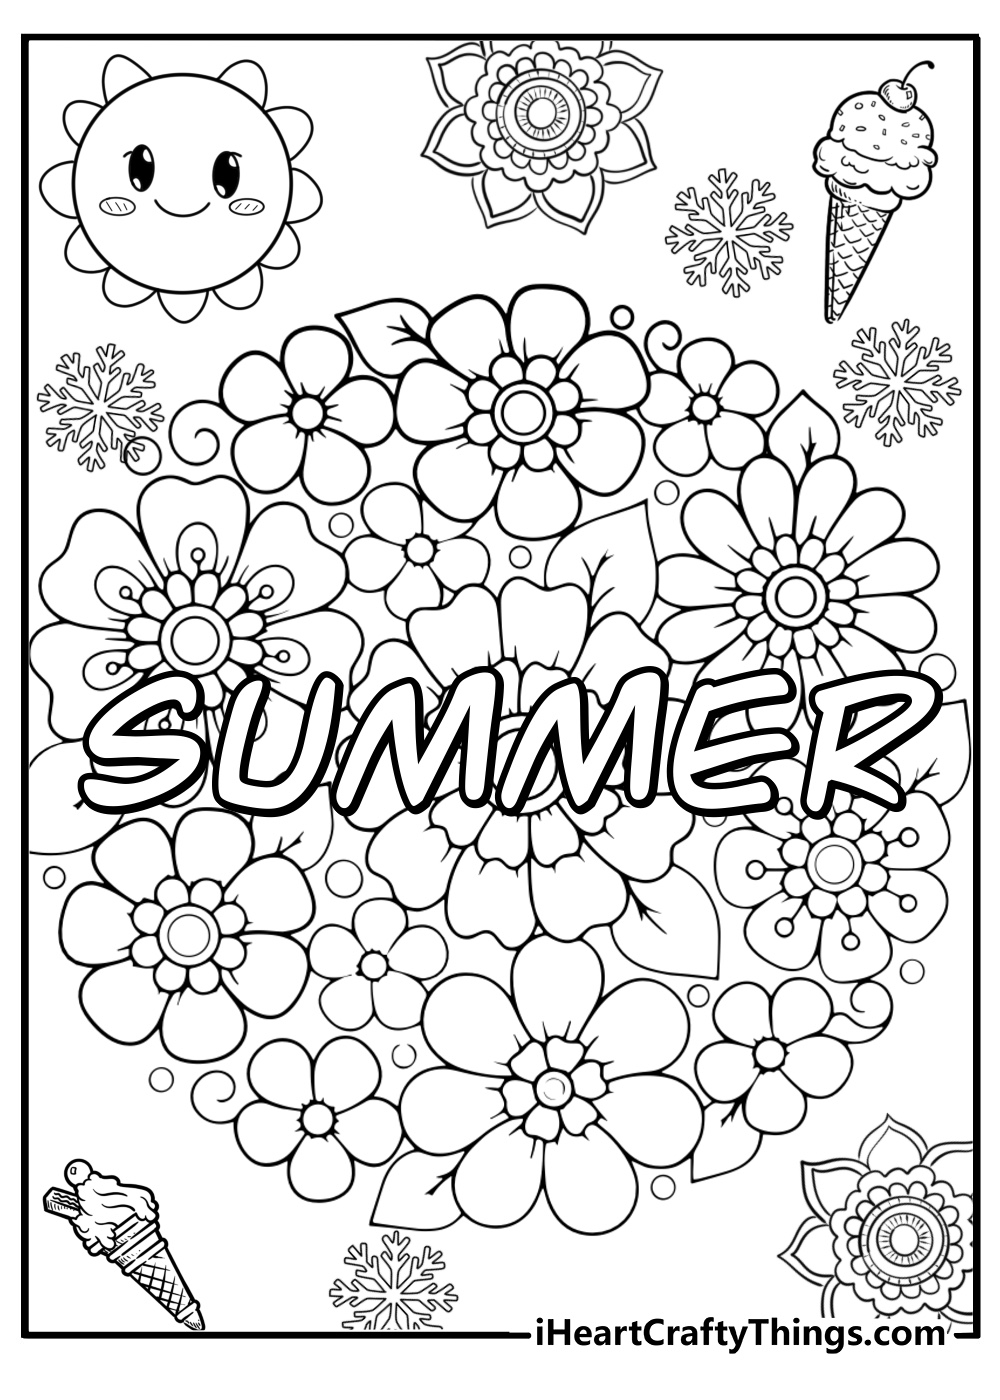 Summer coloring pages adult